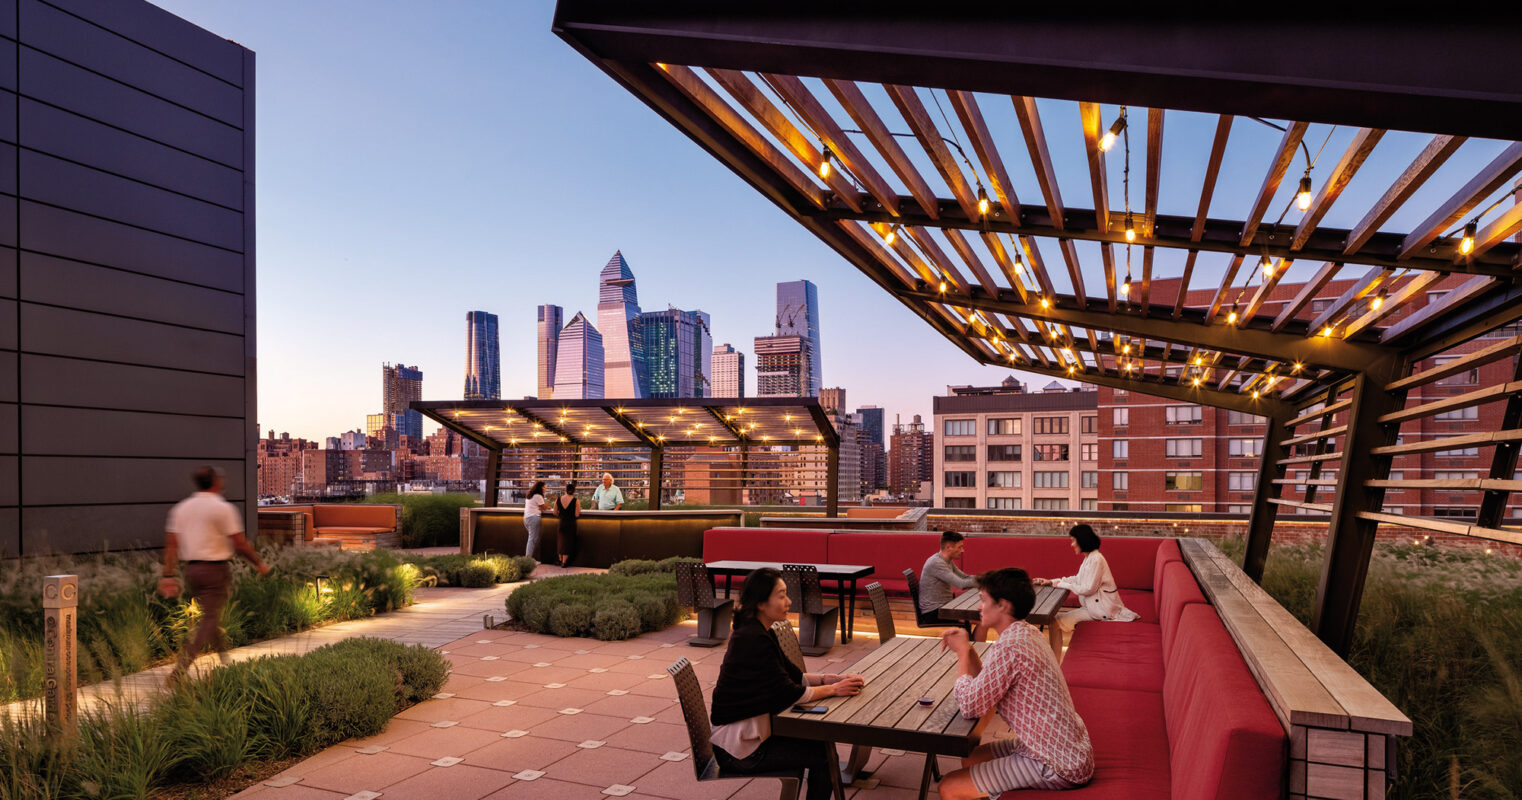 An urban rooftop oasis at dusk, with individuals enjoying conversation around a table, framed by a sleek wooden pergola and the glowing skyline in the background.